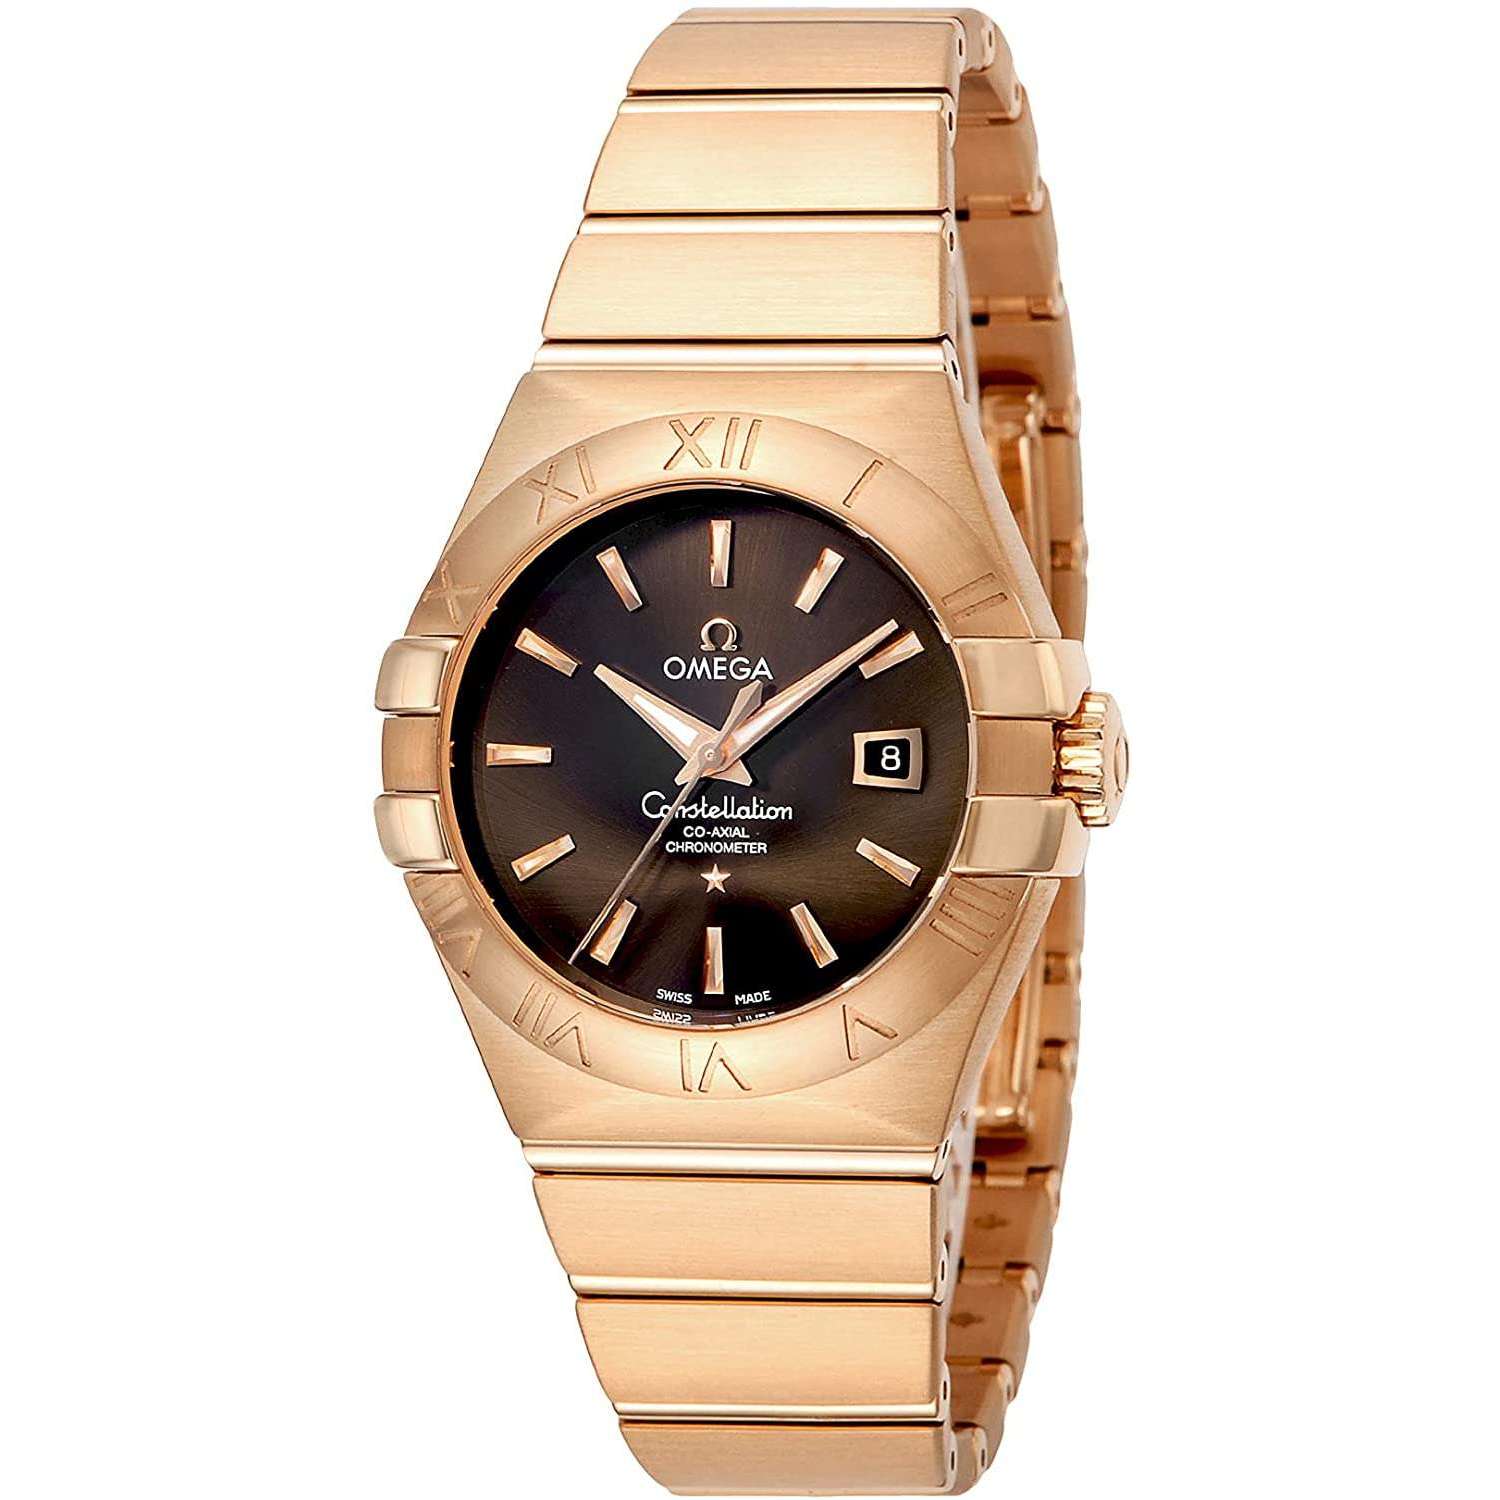 OMEGA CONSTELLATION CO-AXIAL CHRONOMETER 31 MM WOMEN WATCH 123.50.31.20.13.001 - ROOK JAPAN